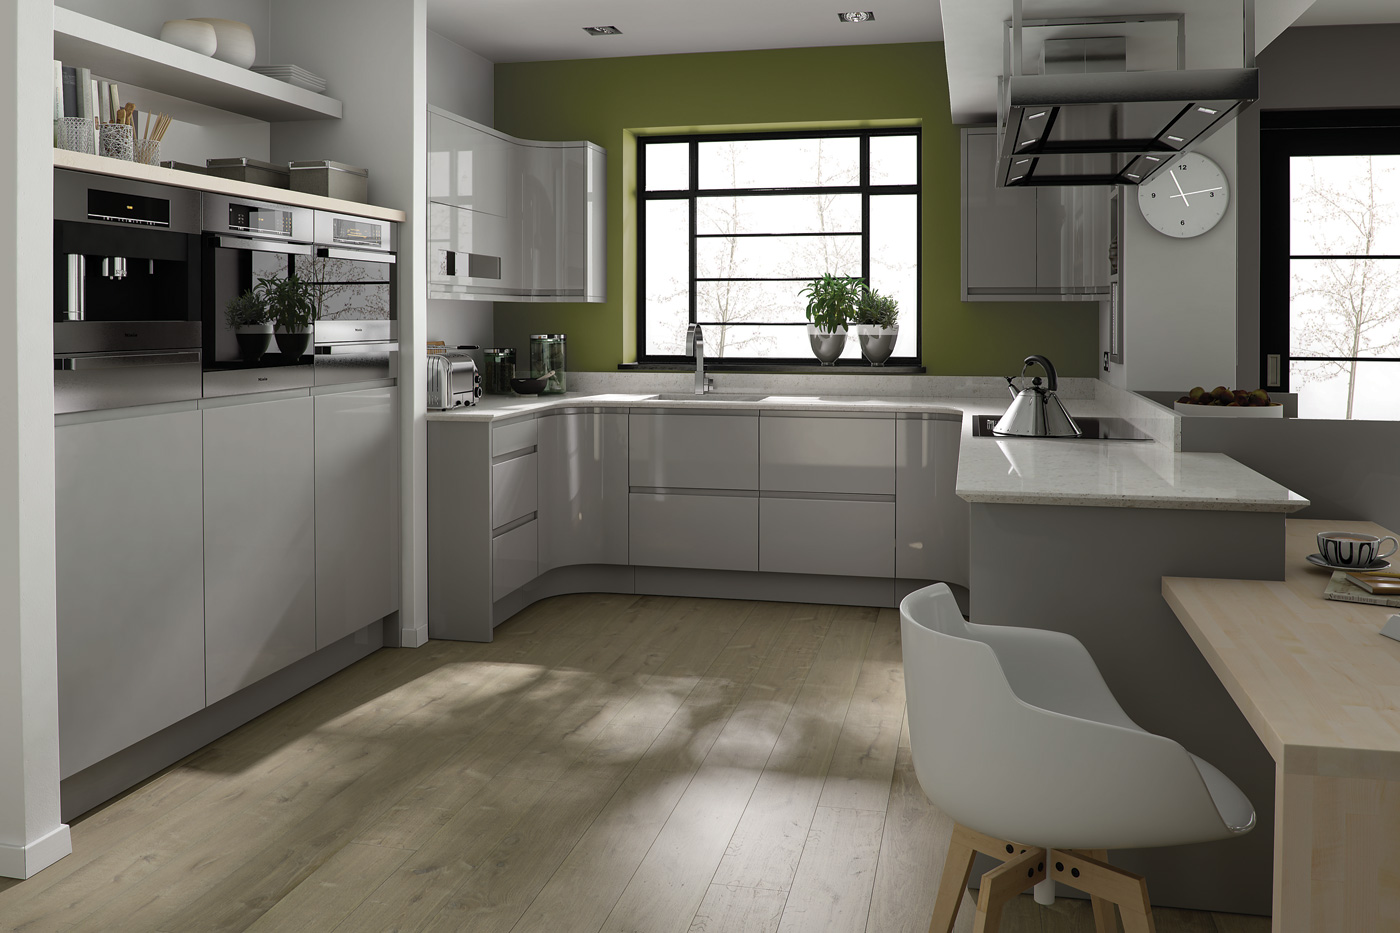 Top Tips for Planning and Designing your new kitchen